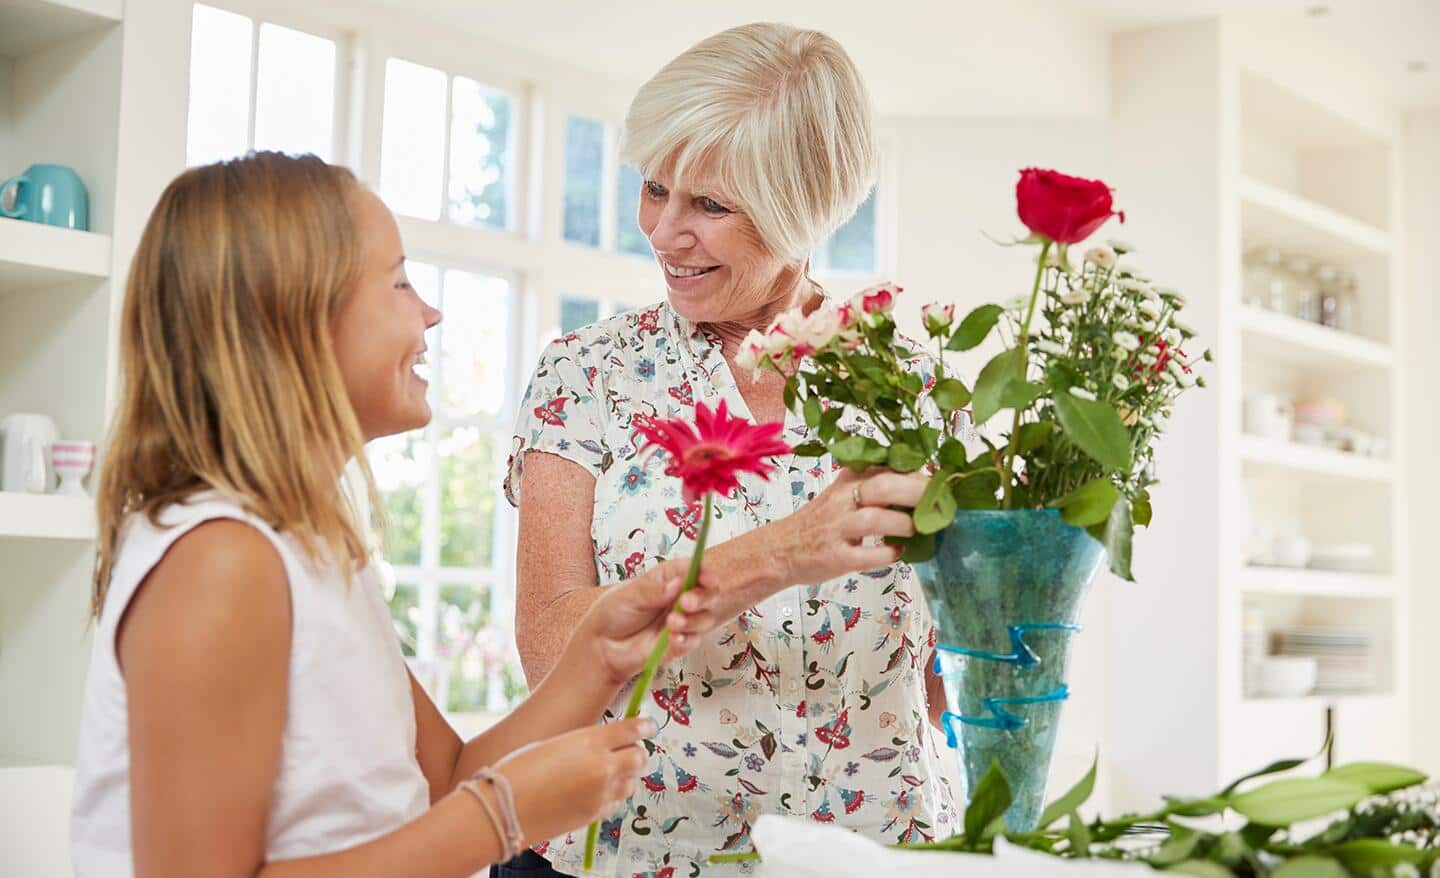 A woman and girl arranging cut roses in a vase